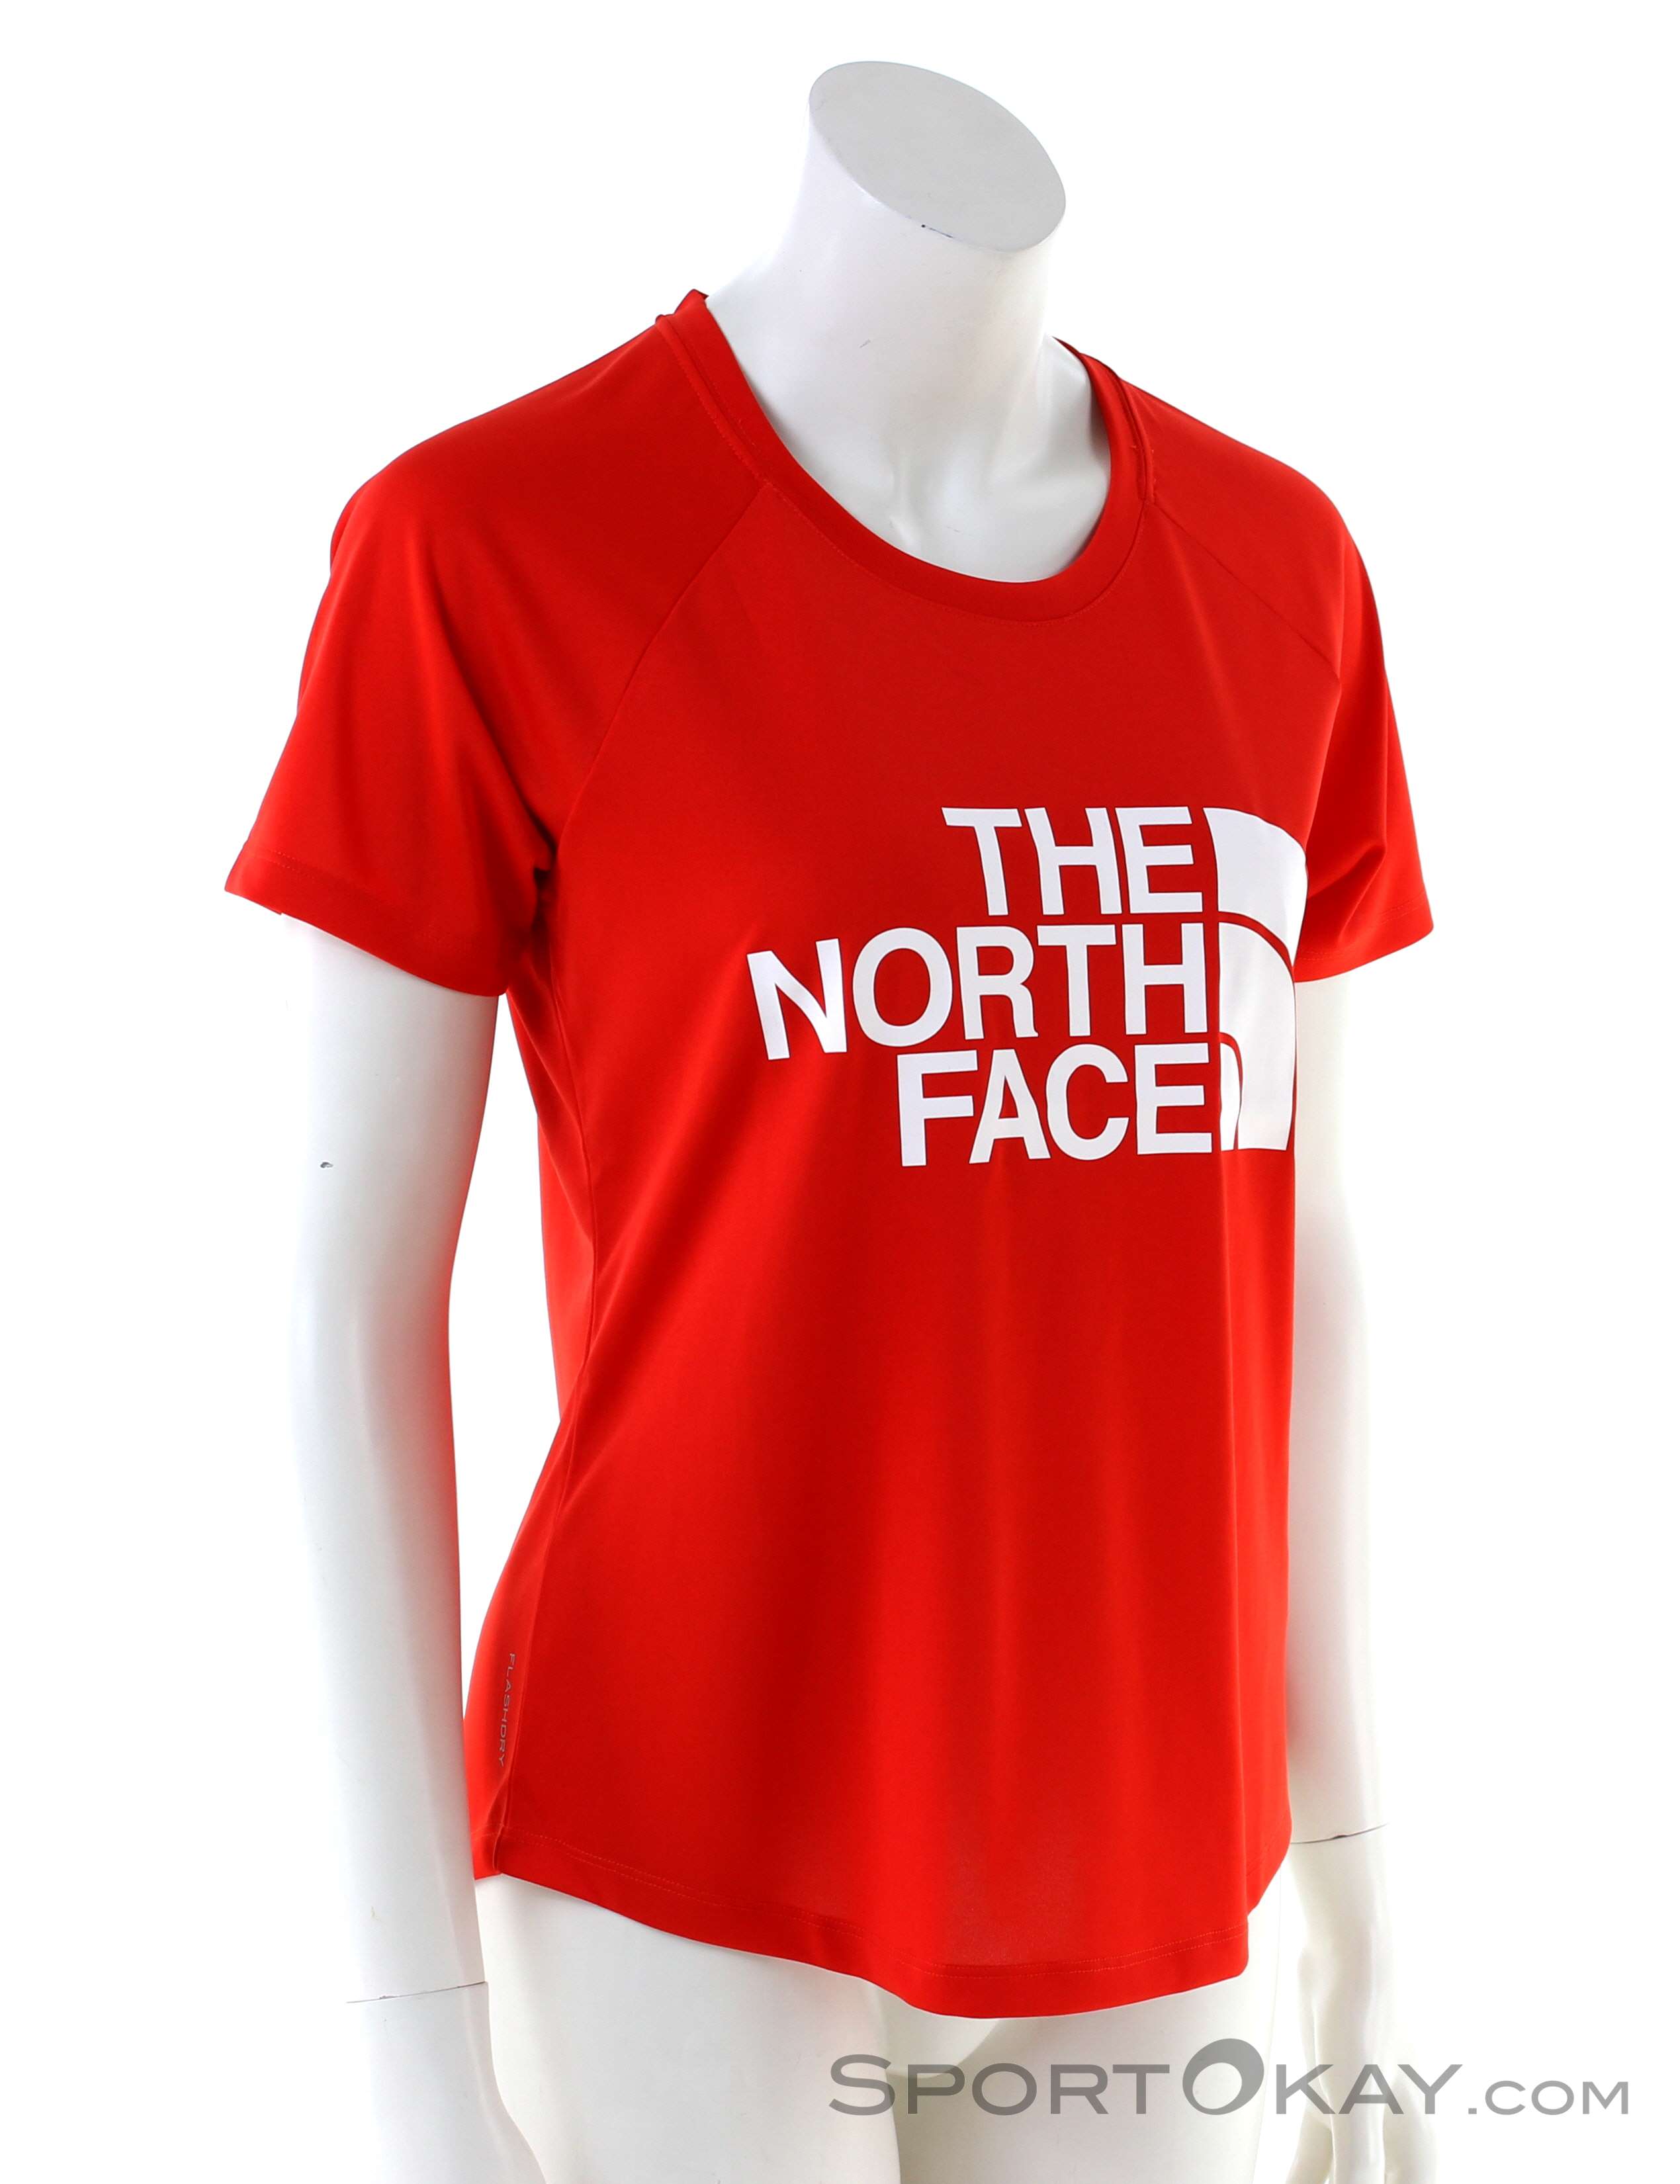 The North Face Graphic Play Hard Womens T Shirt Shirts T Shirts Fitness Clothing Fitness All